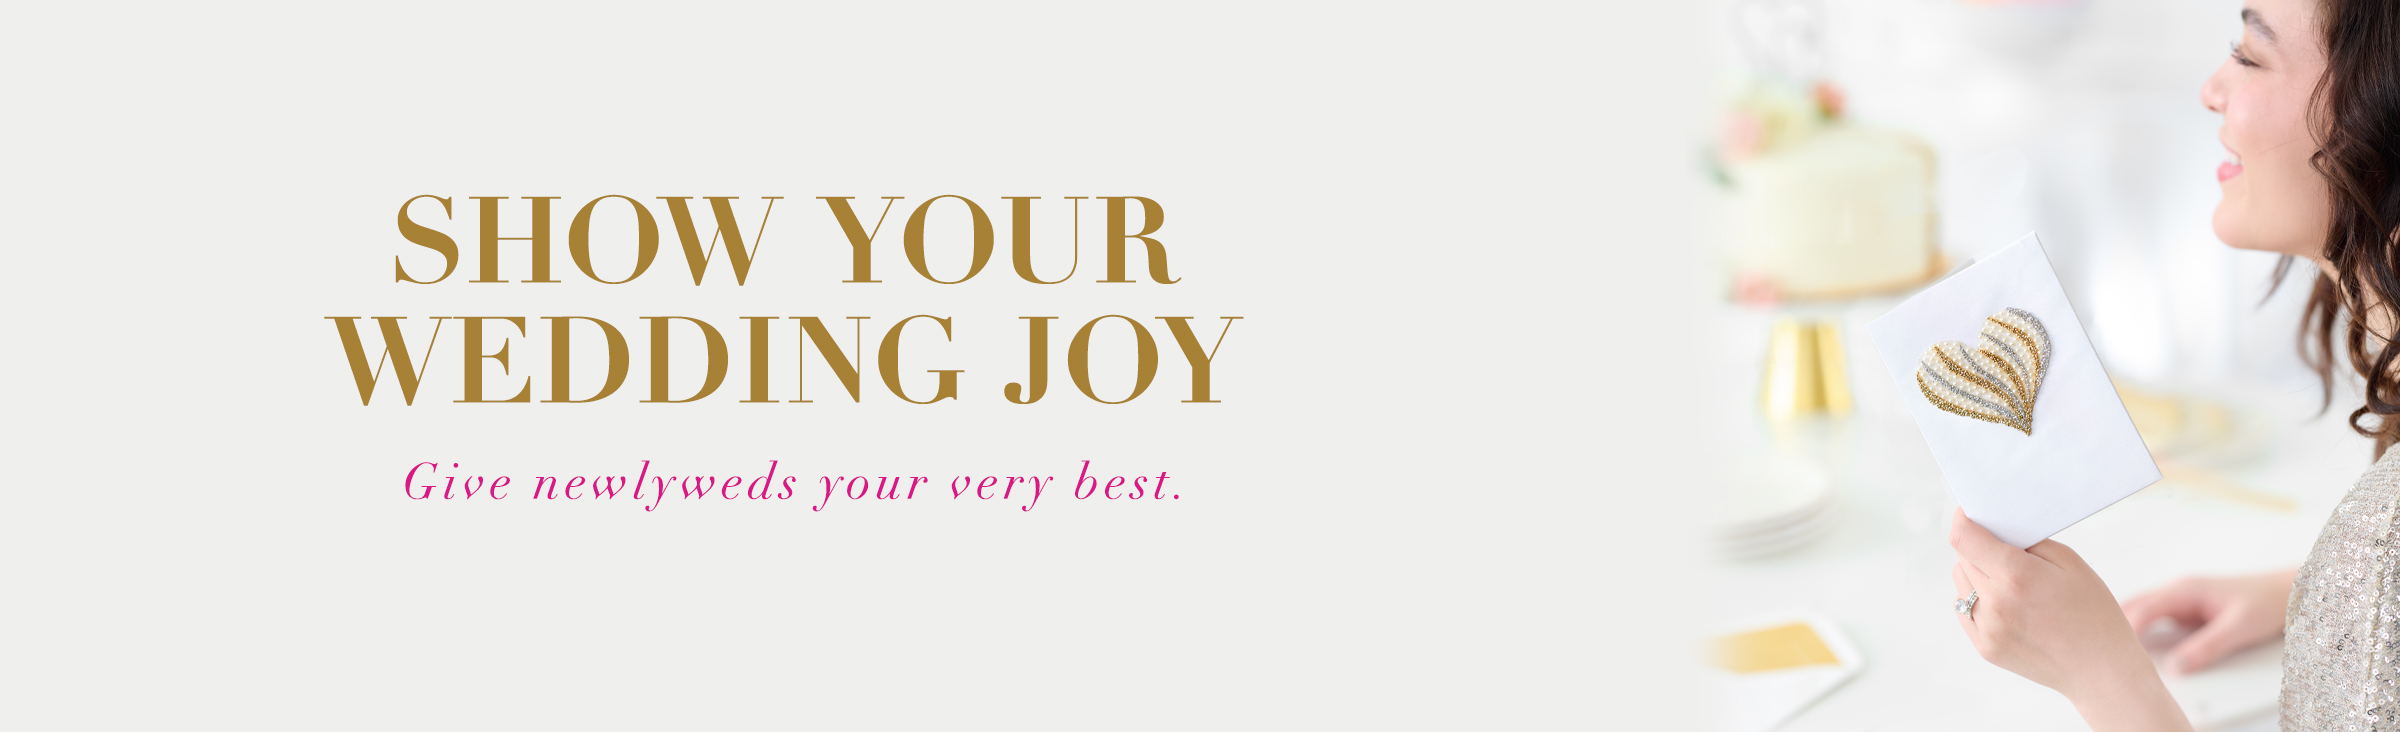 Show your wedding joy Give newly weds your very best